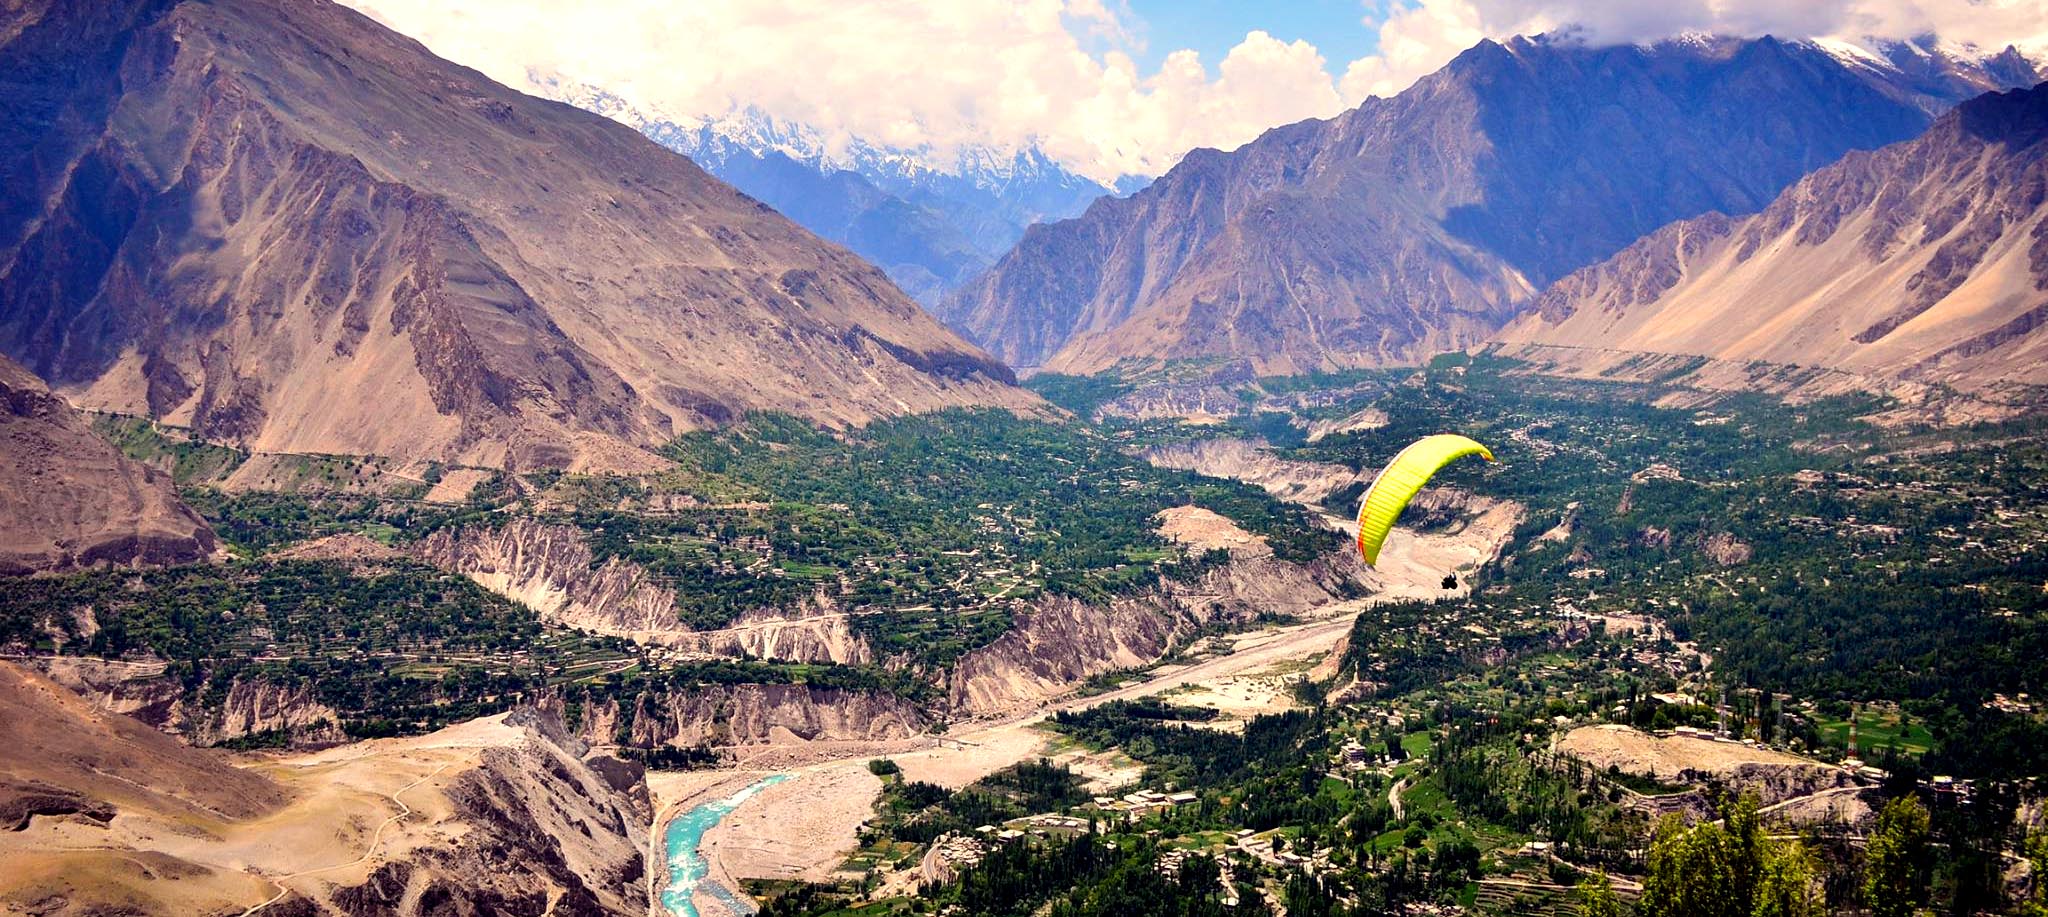 PARAGLIDING IN GILGIT VALLEY